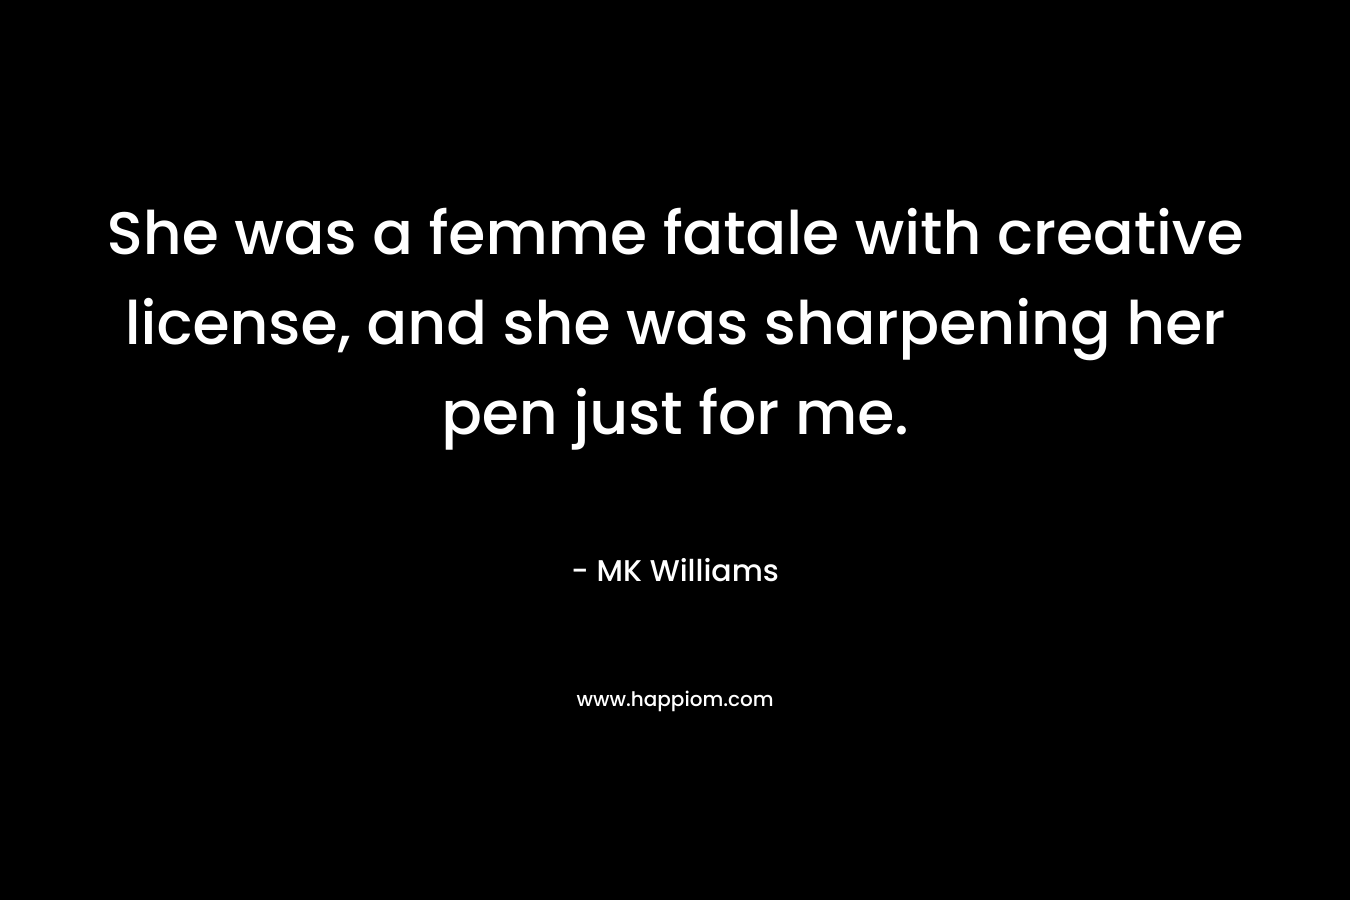 She was a femme fatale with creative license, and she was sharpening her pen just for me.